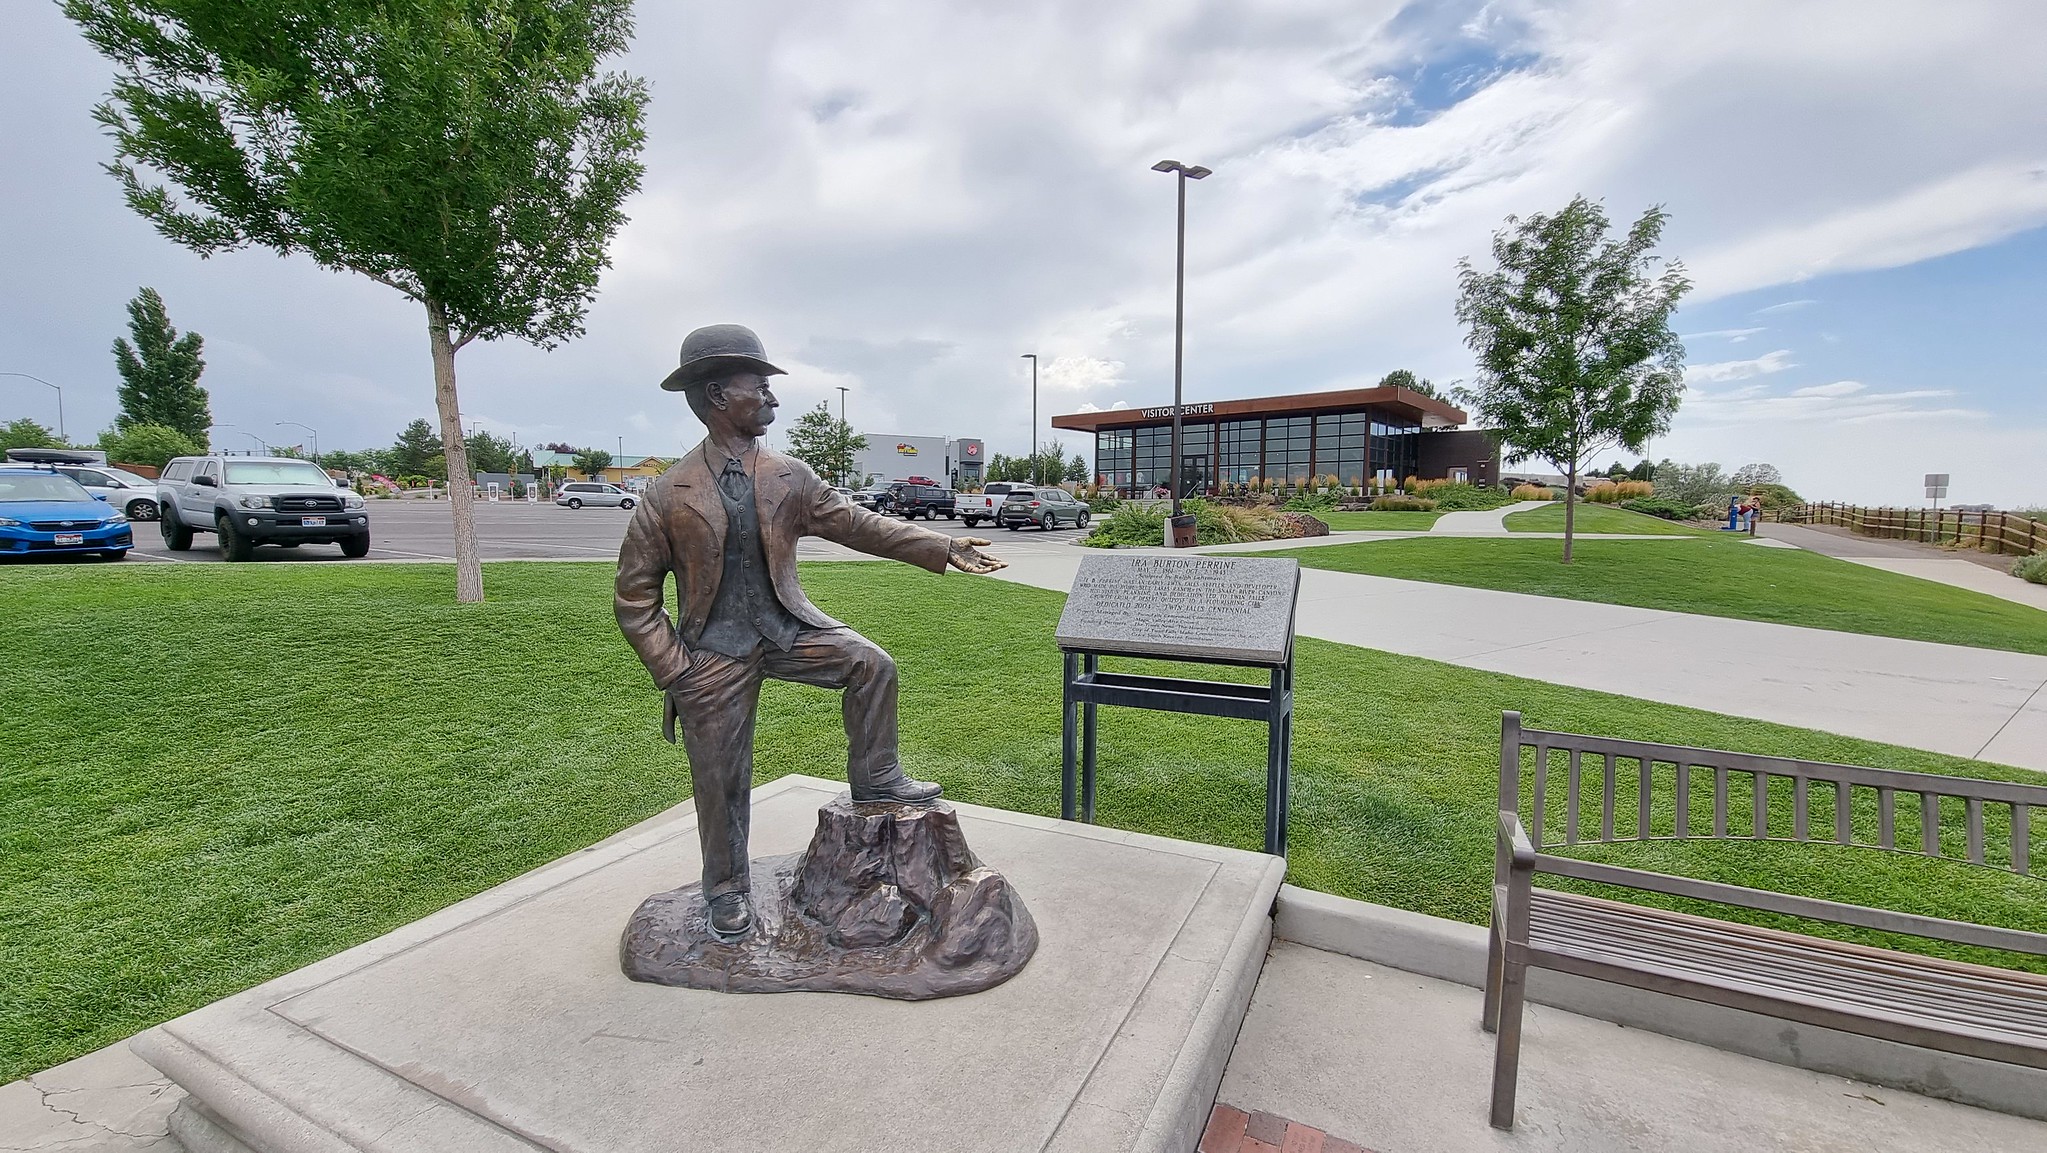 A view of the statue of Ira Burton Perrine with the Visitors Center in the background at Twin Falls